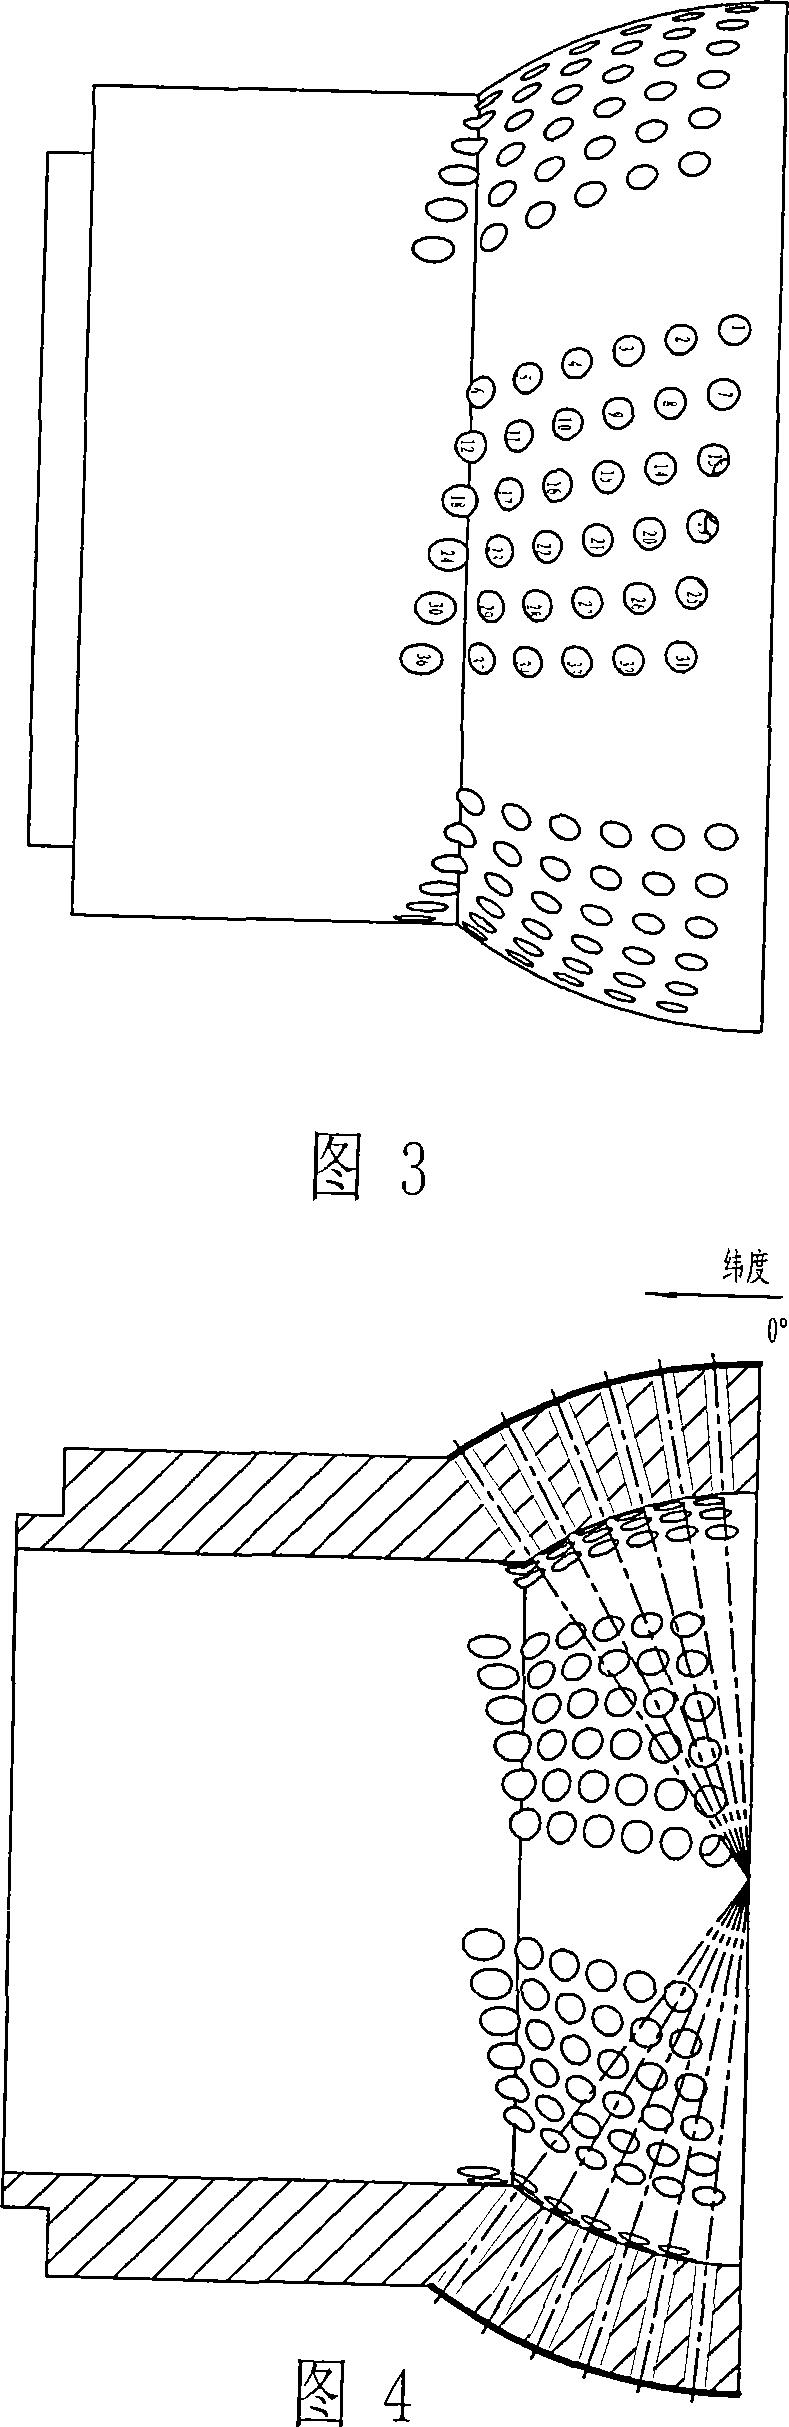 Multi-collimating body radiation therapy device